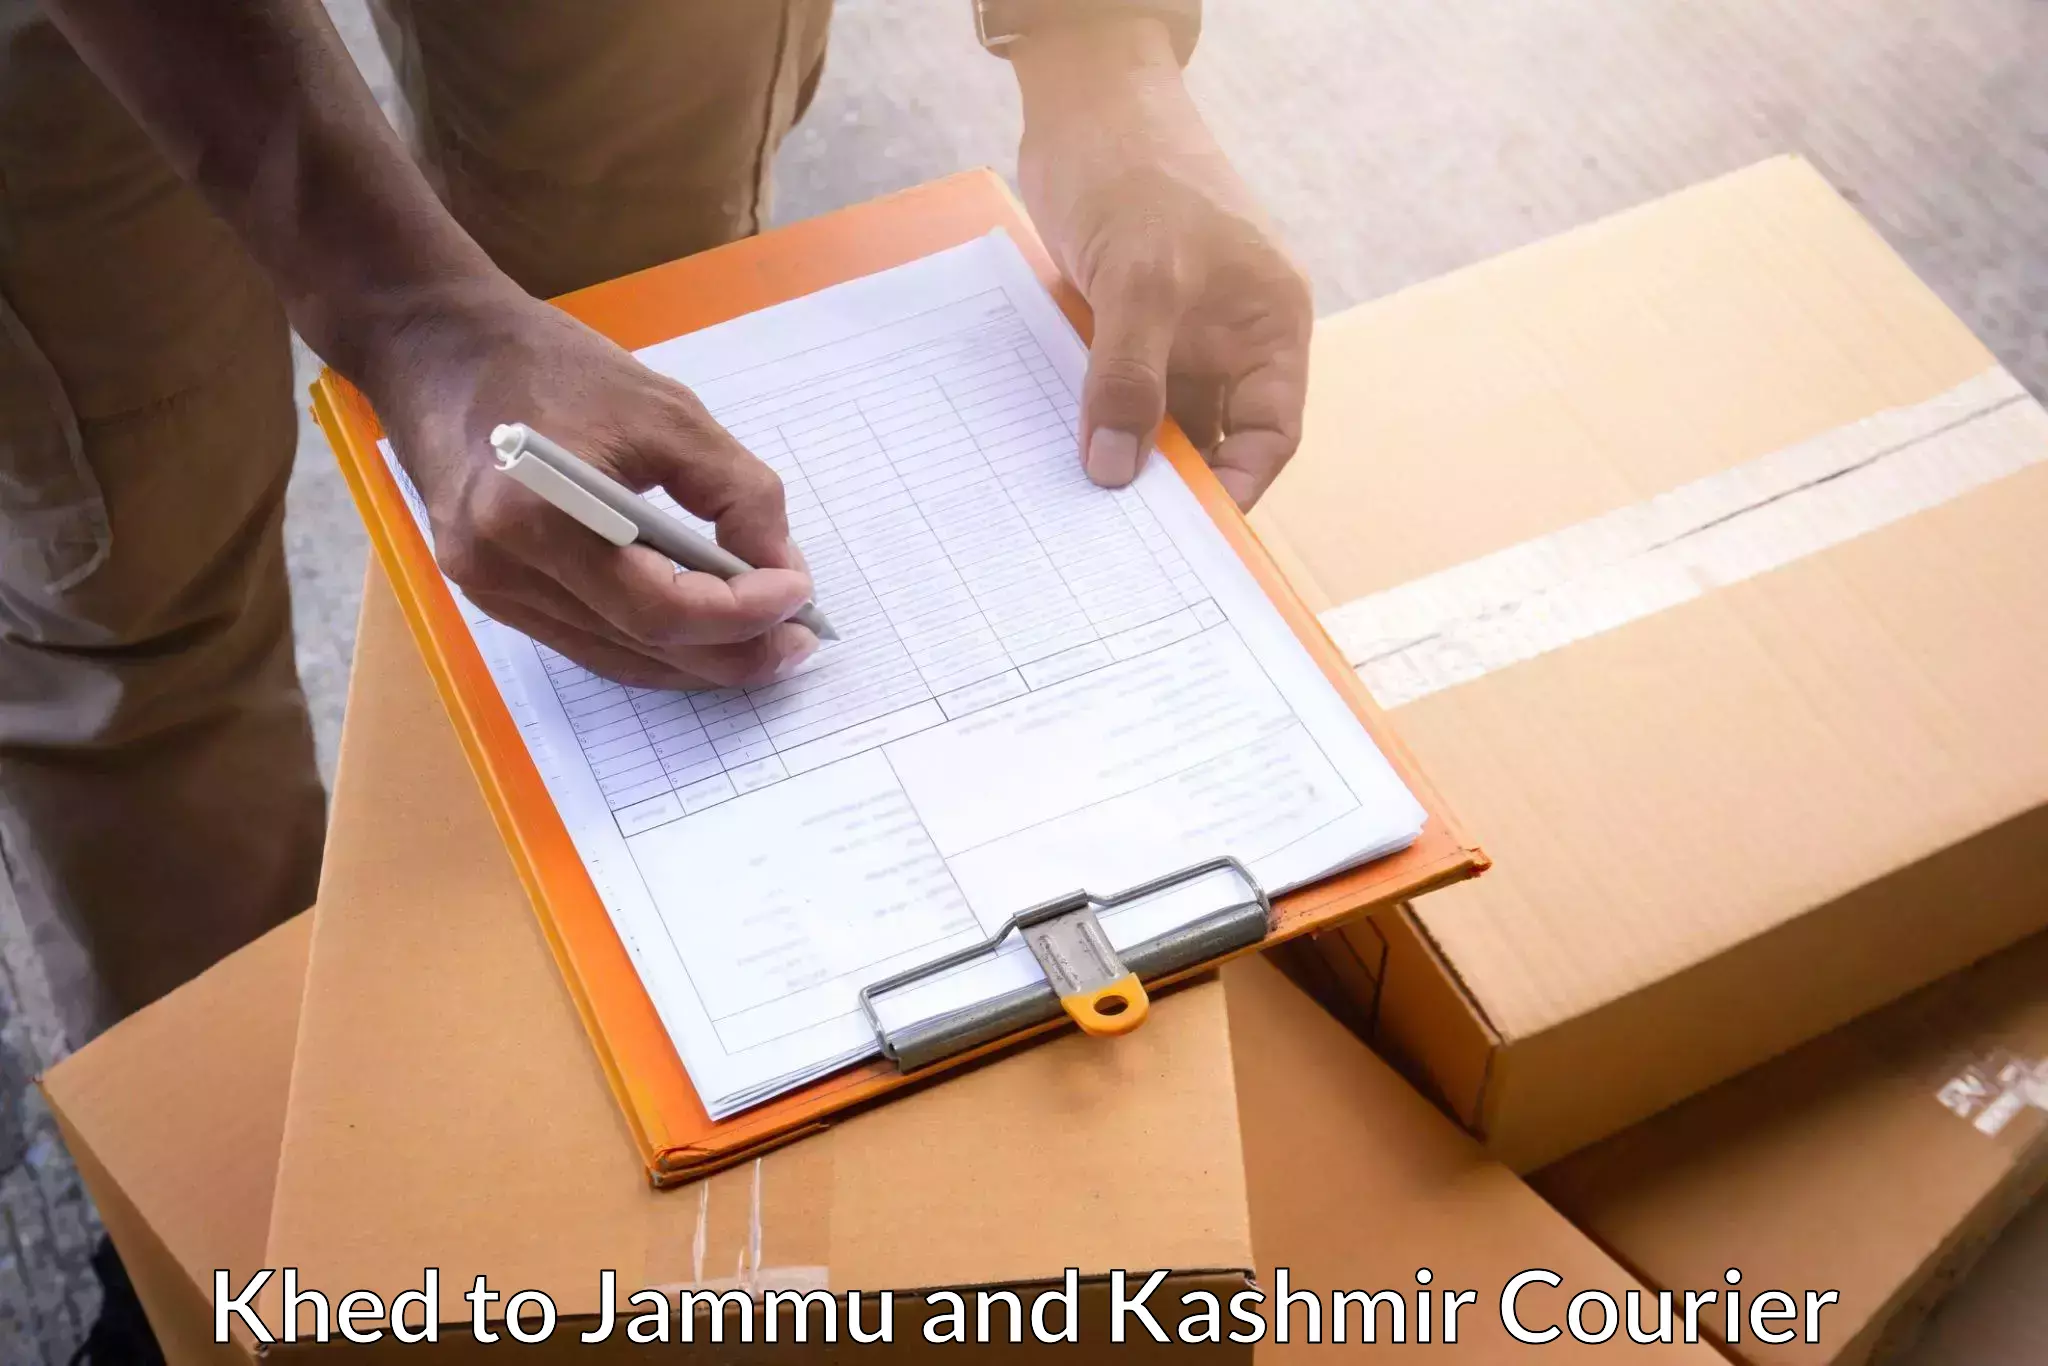 Pharmaceutical courier Khed to University of Jammu